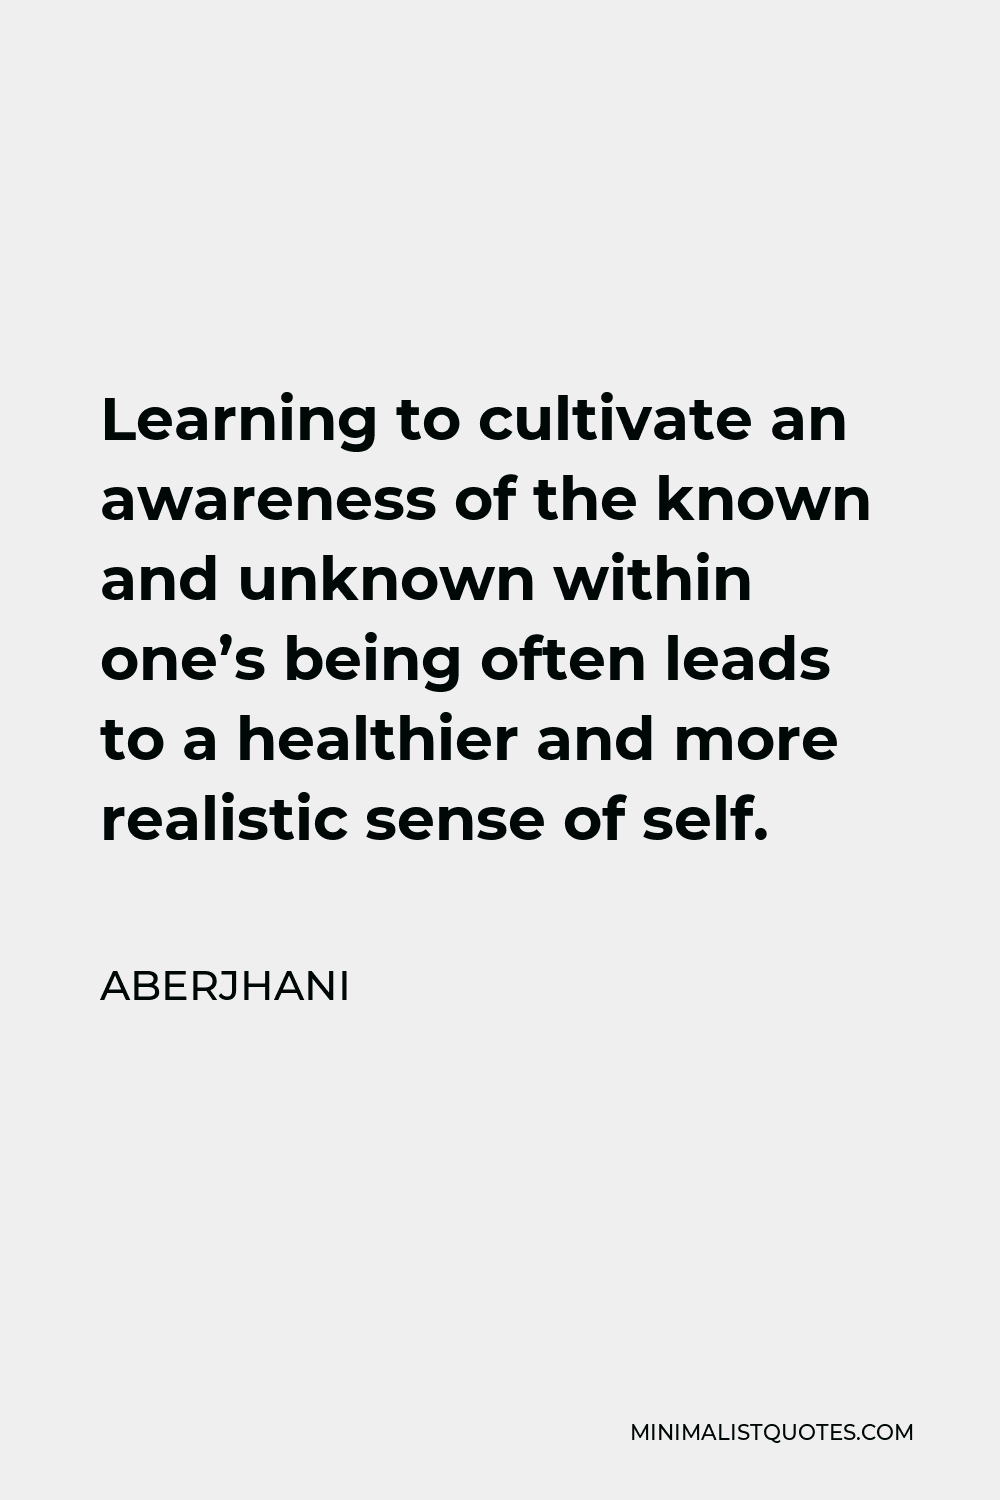 Aberjhani Quote - Learning to cultivate an awareness of the known and unknown within one’s being often leads to a healthier and more realistic sense of self.